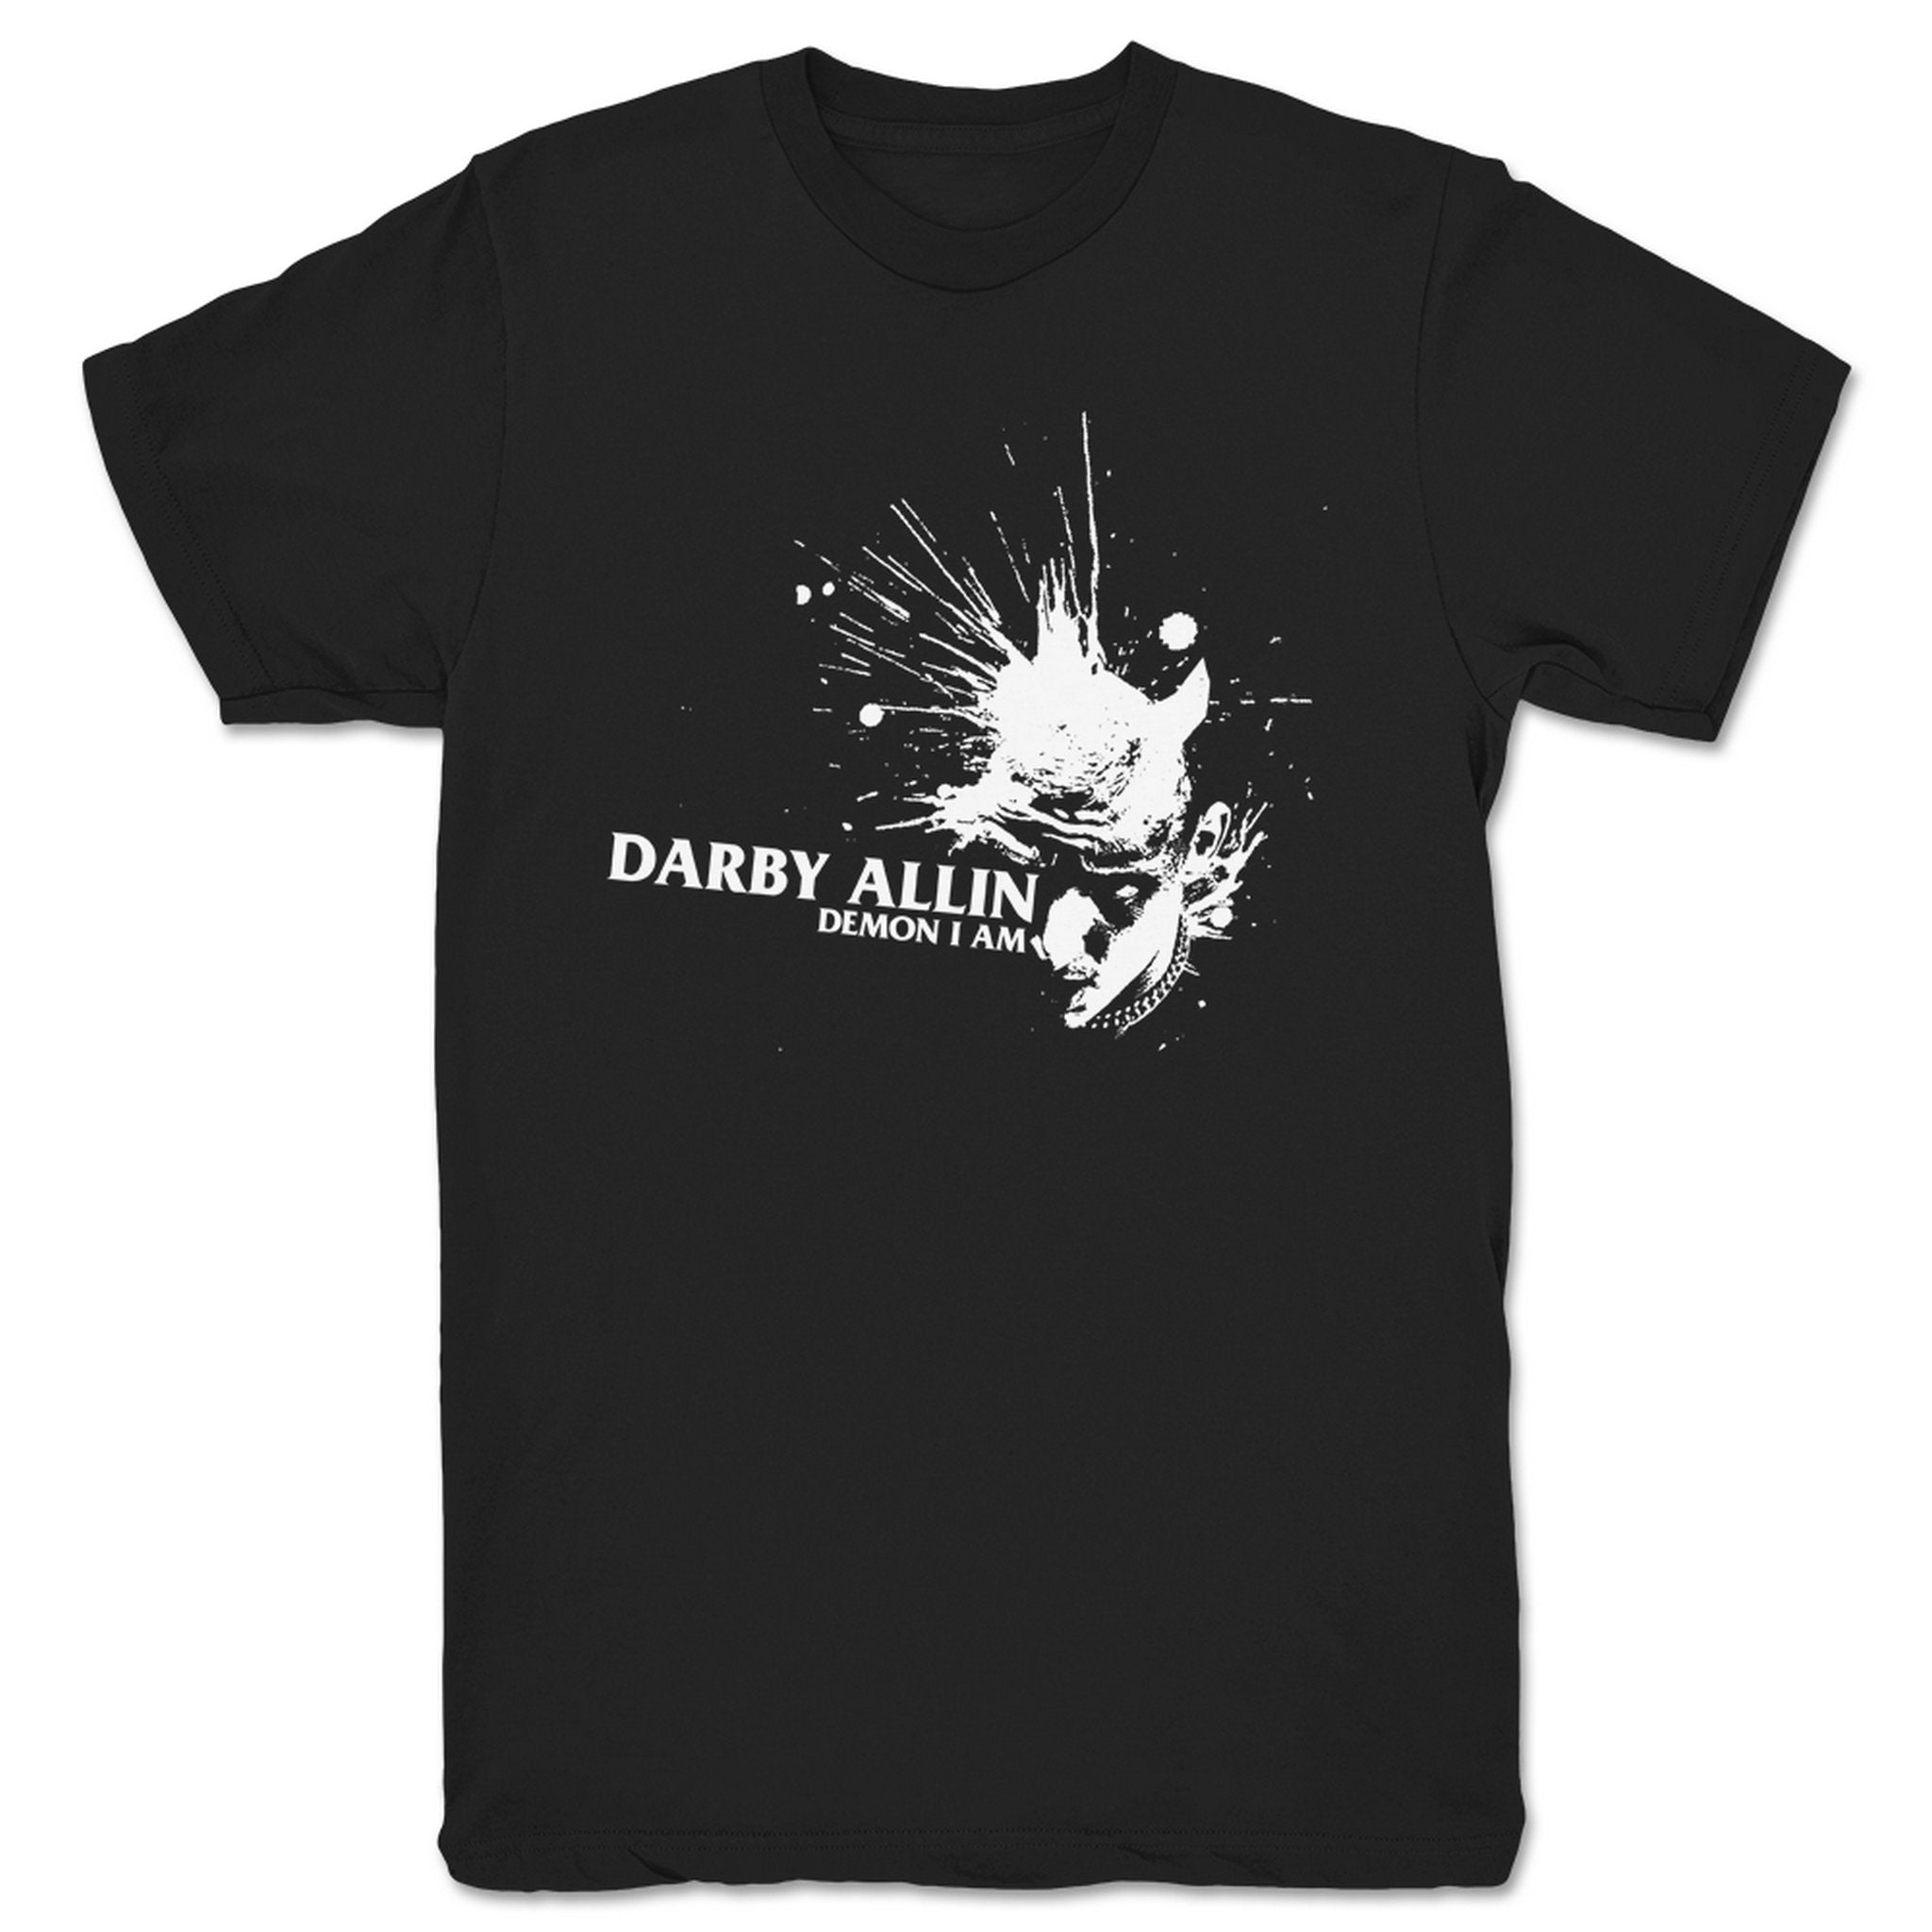 Darby Allin Official Store | What a Maneuver!